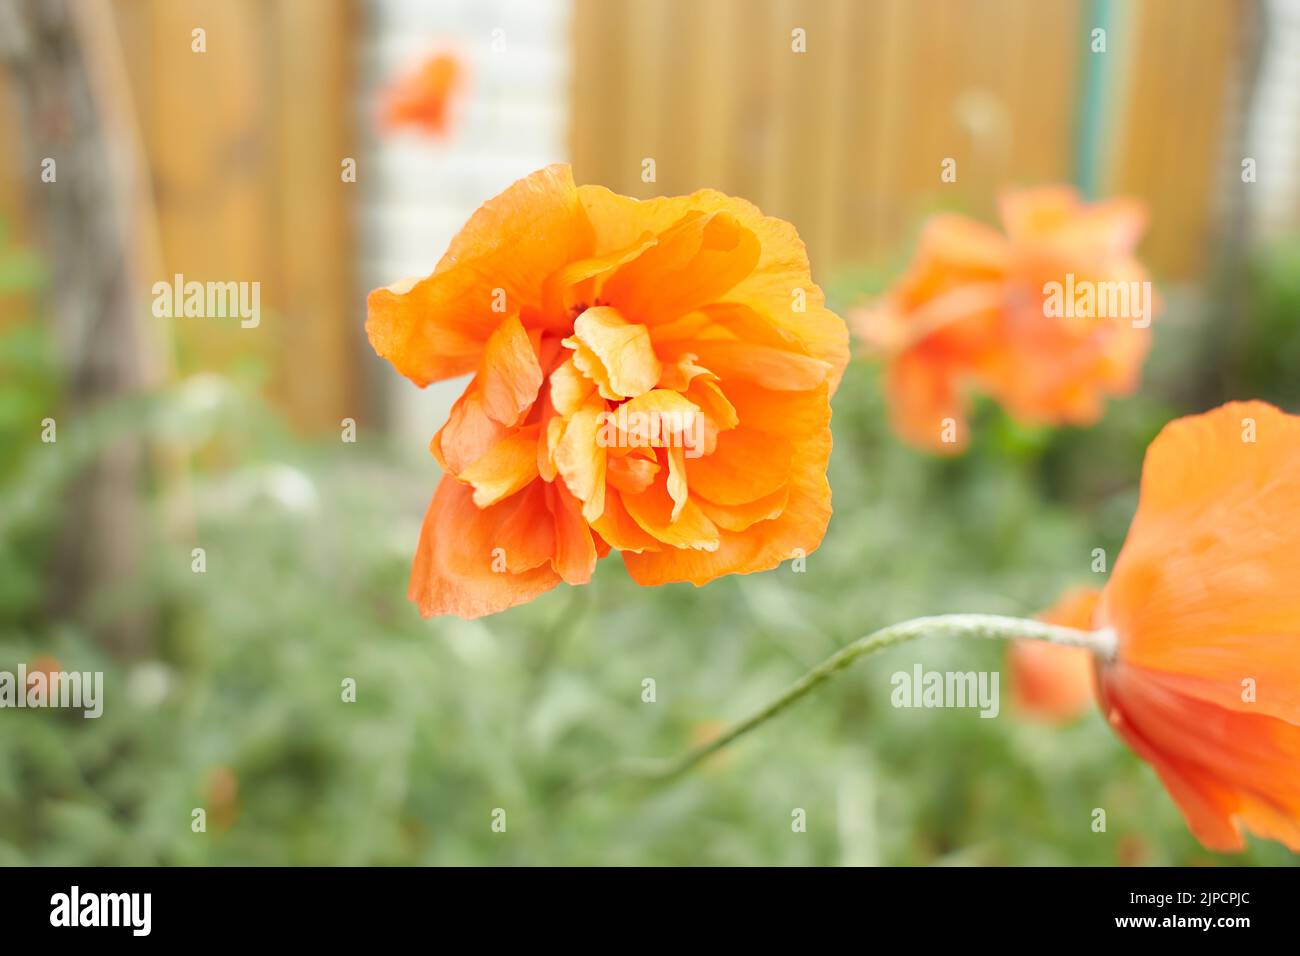 Closeup of a vibrant red Poppy flower Stock Photo